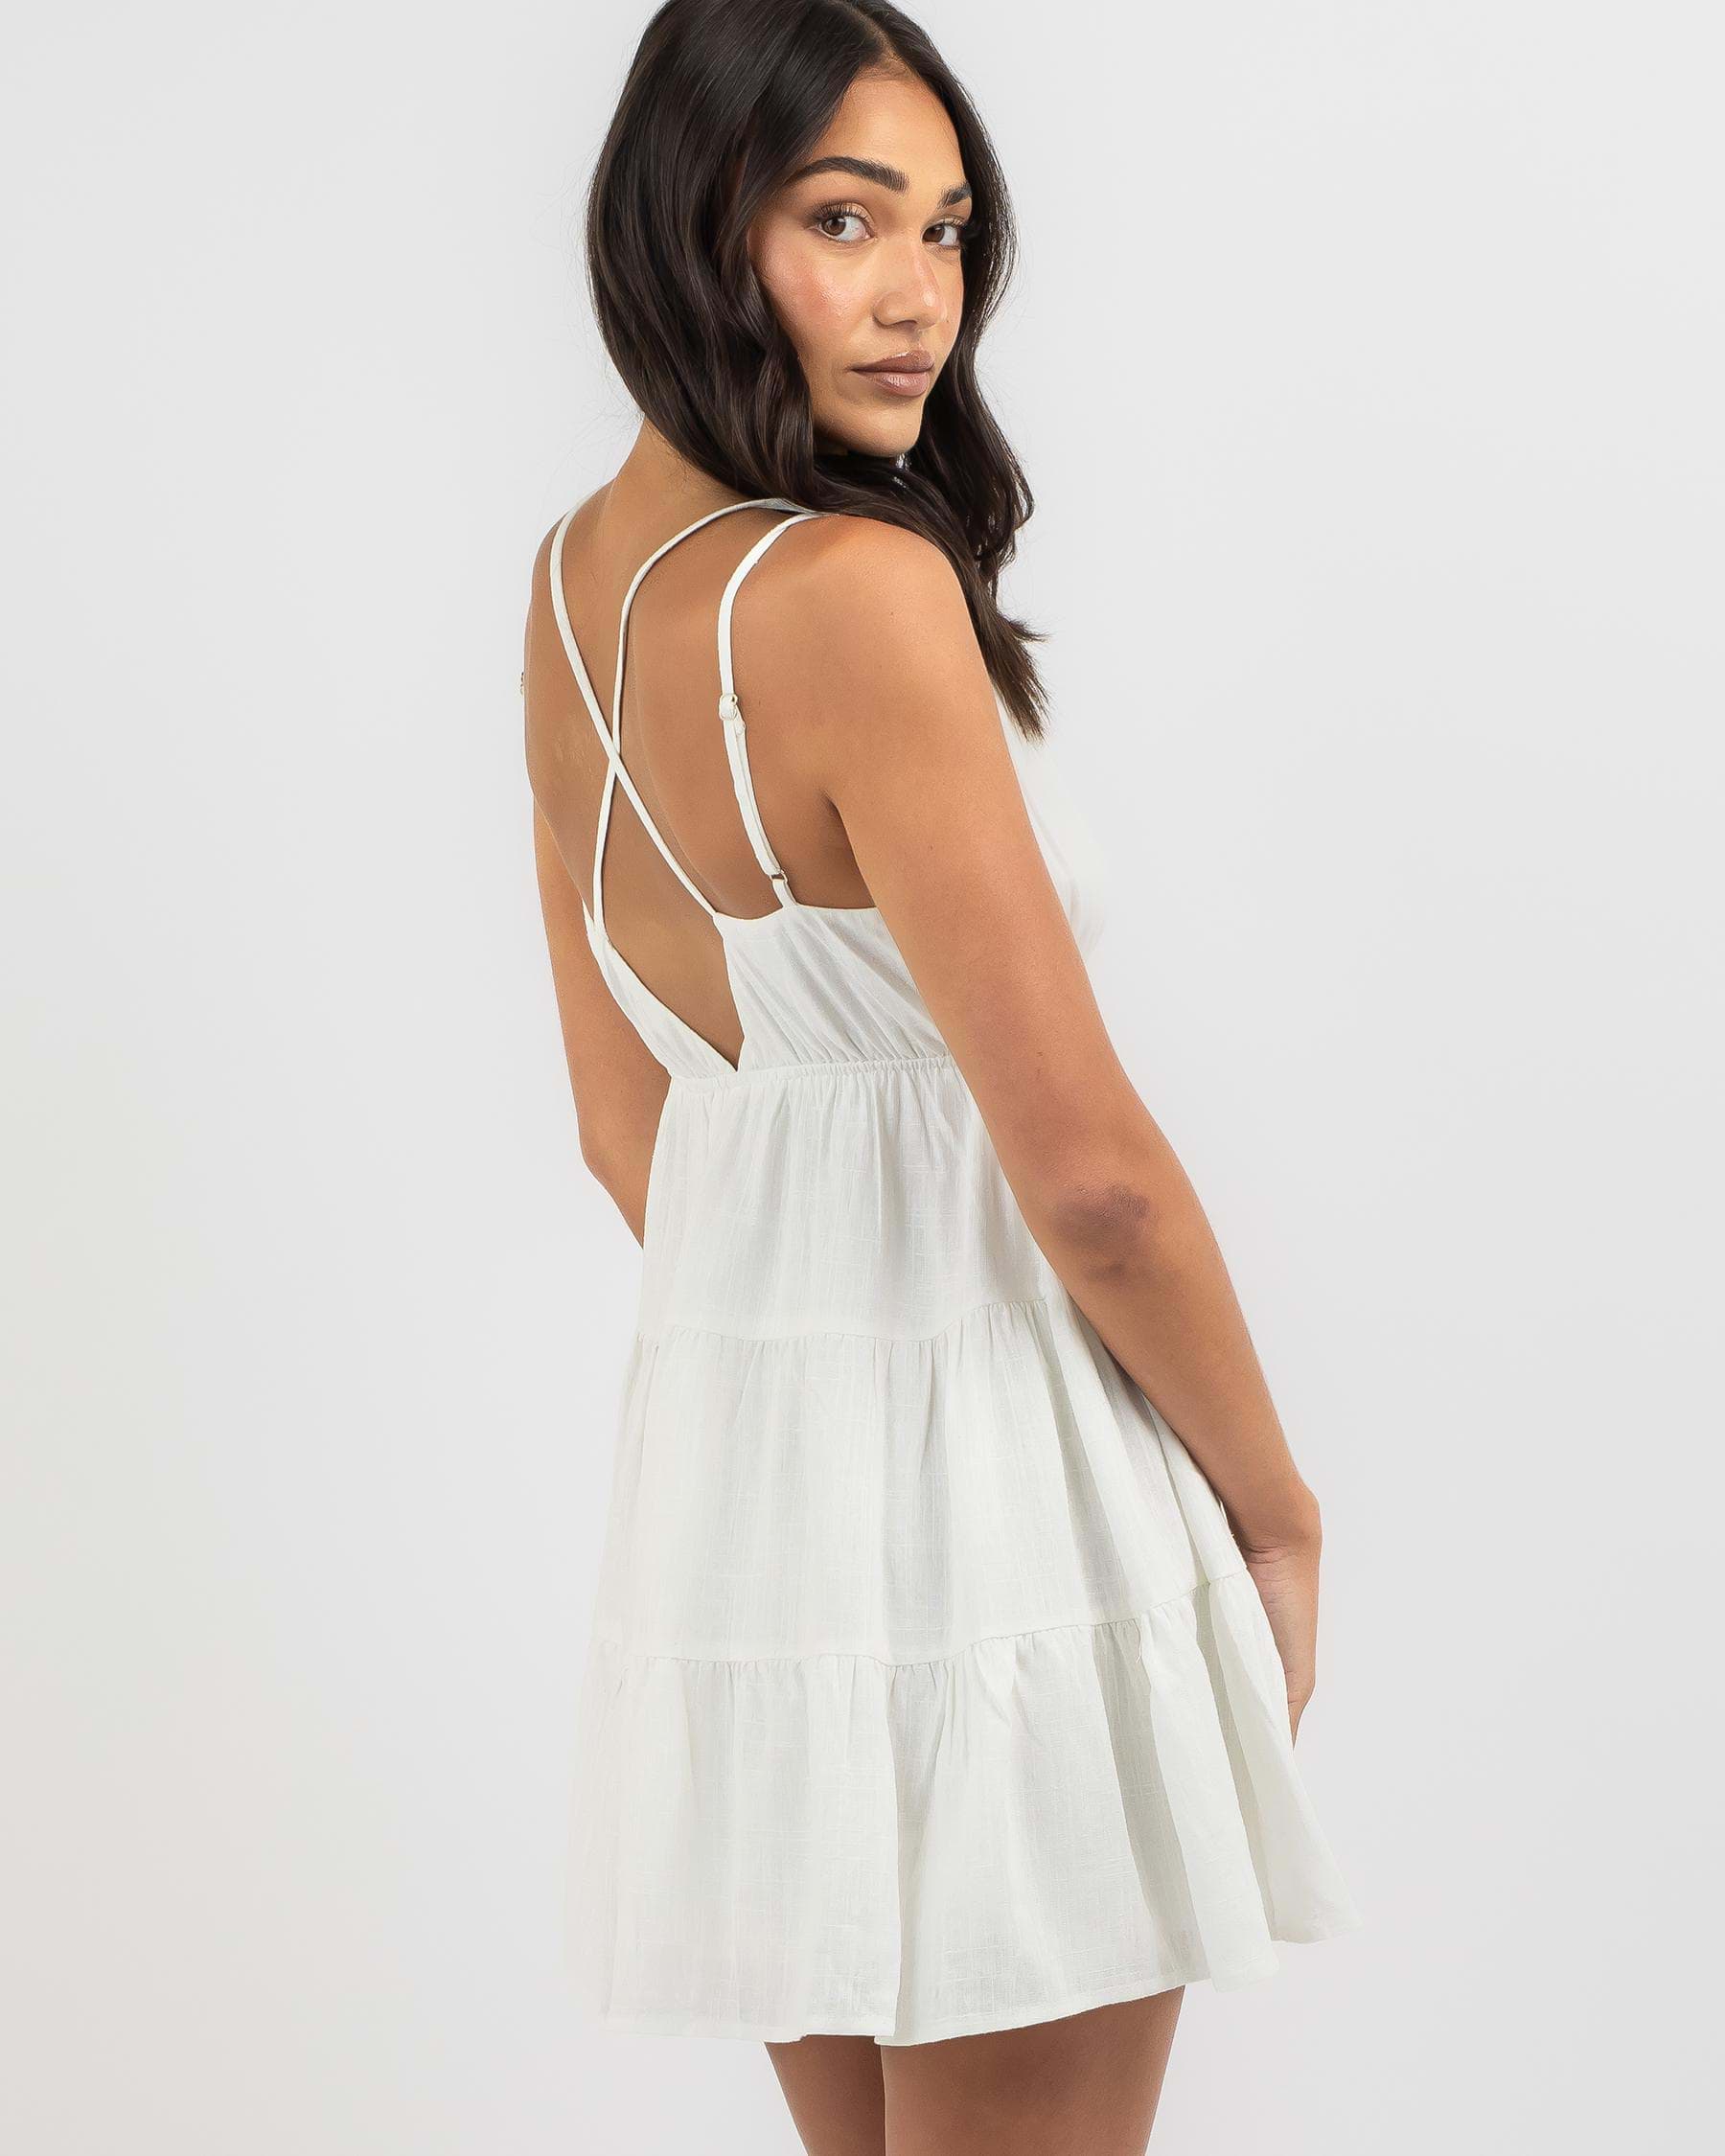 Shop Alive Girl Bailee Dress In White - Fast Shipping & Easy Returns ...